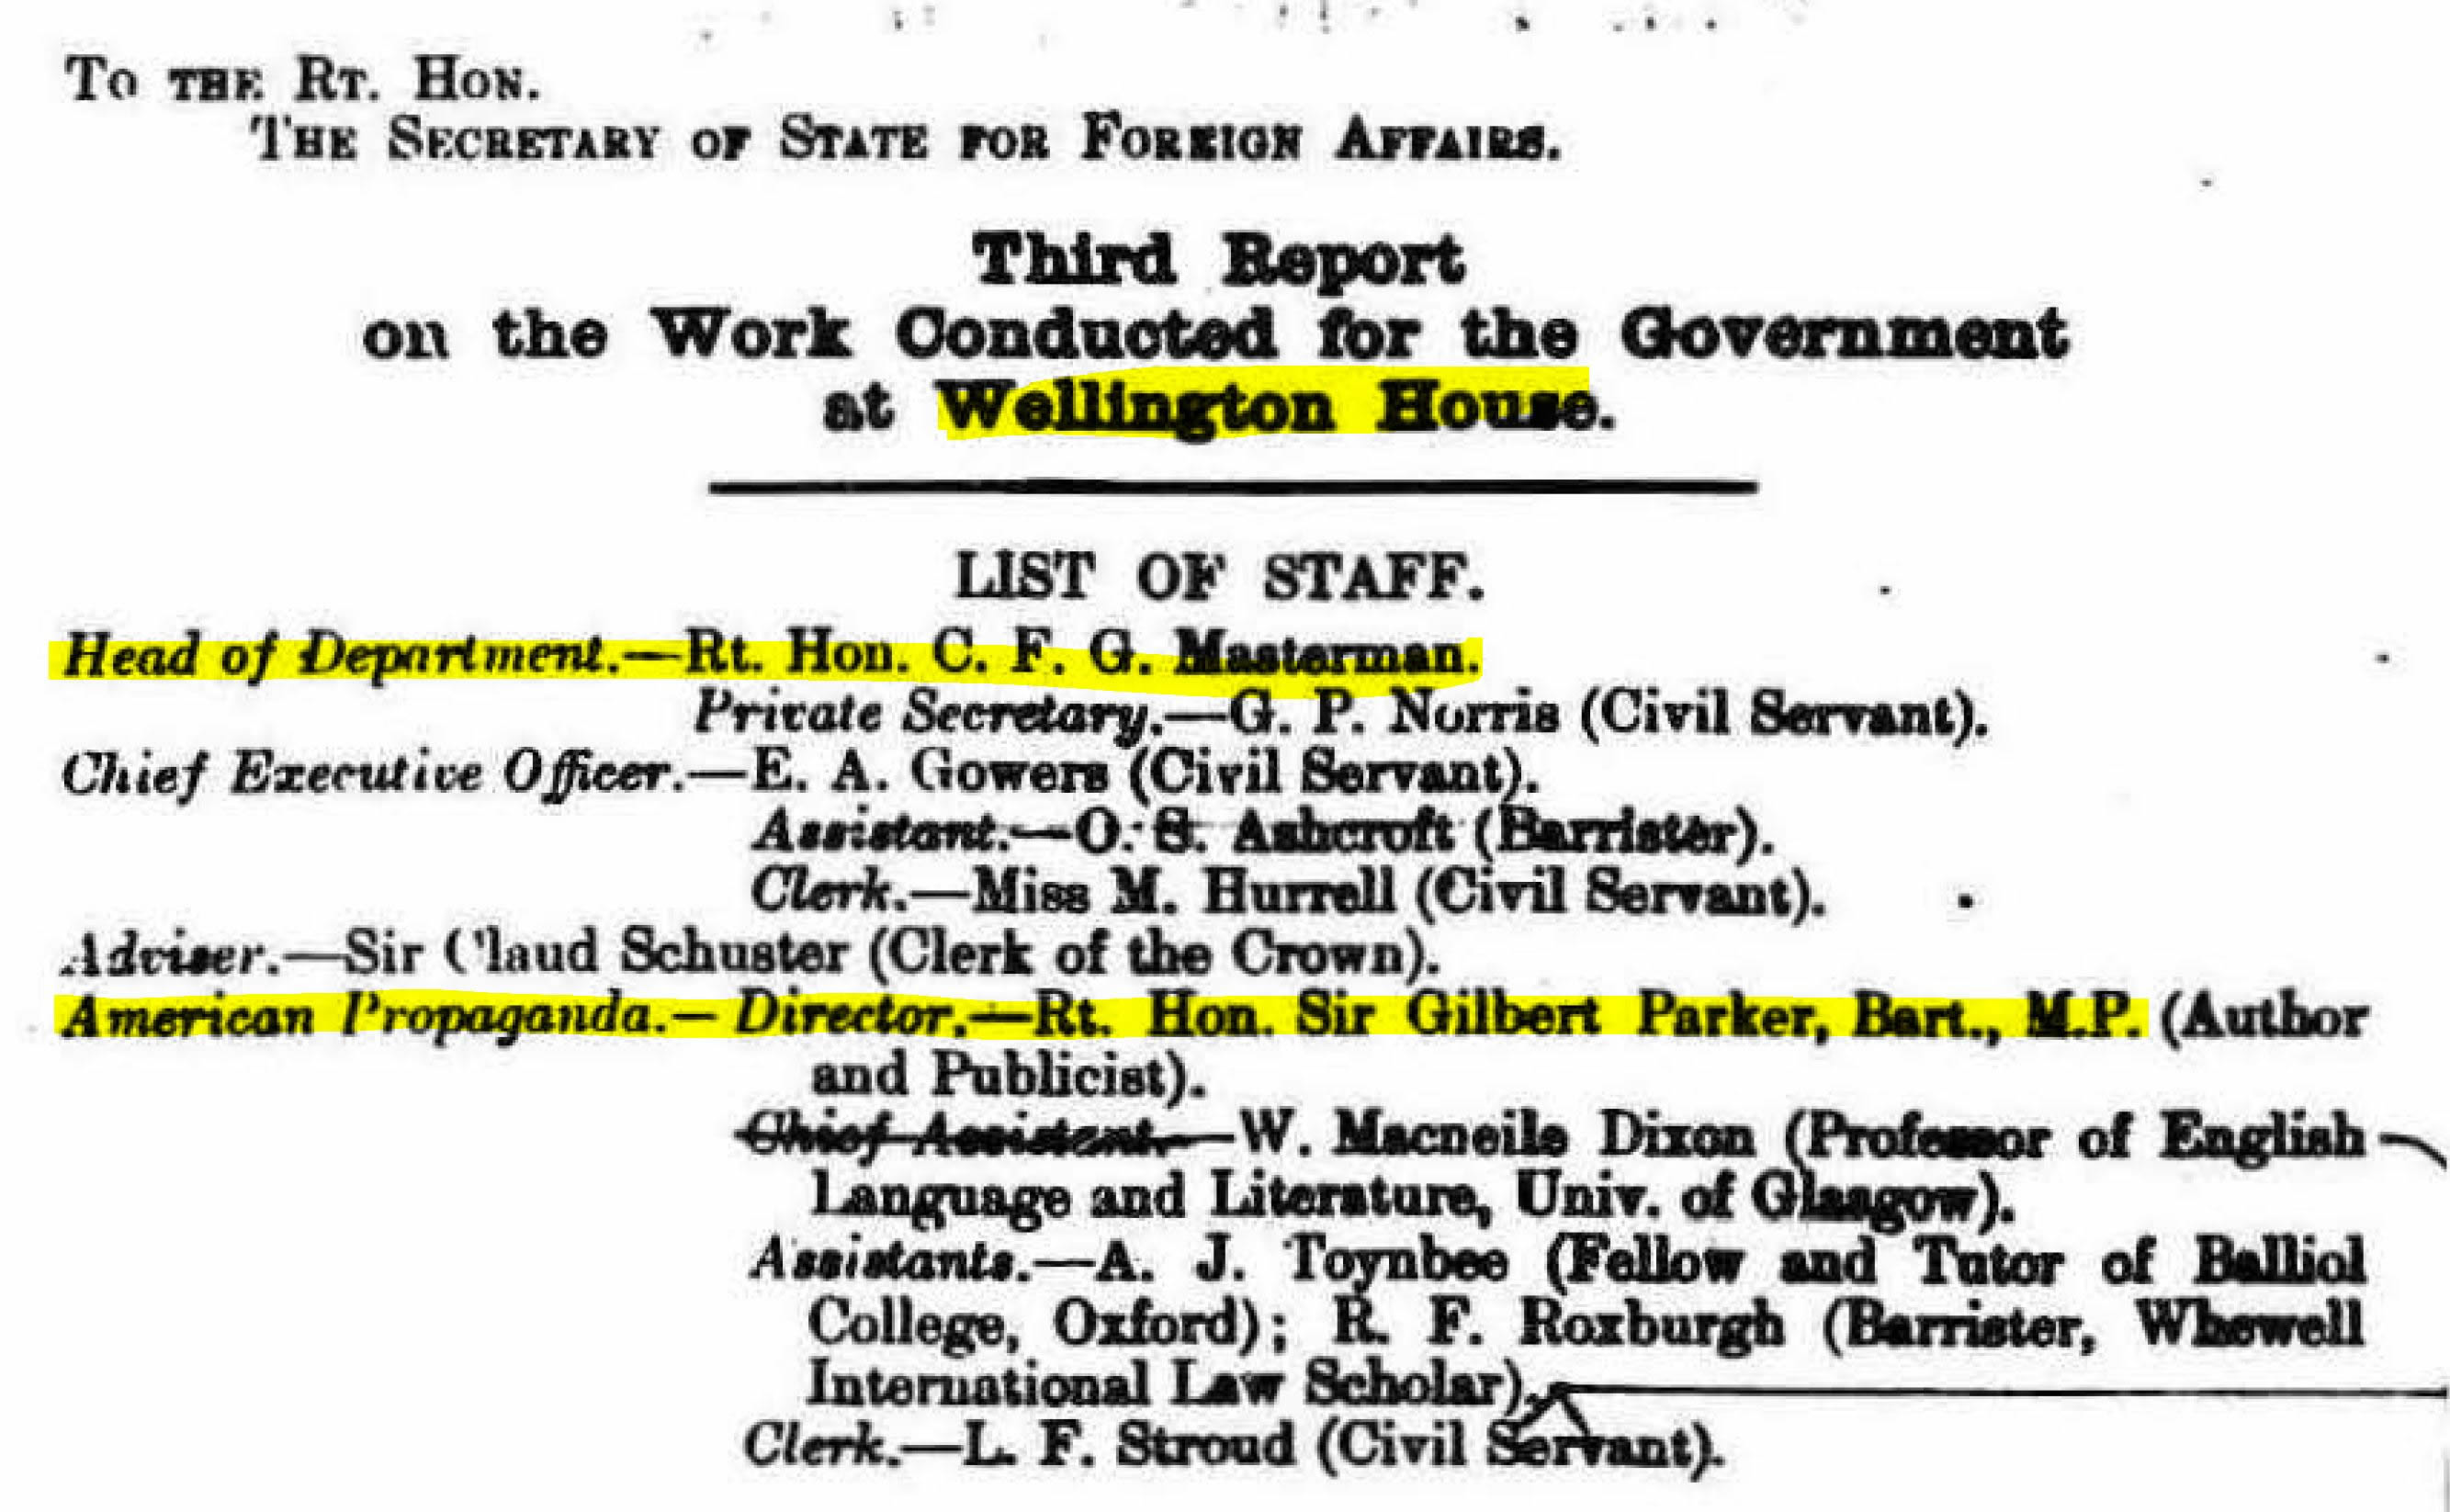 Archivist. (Sep. 01, 1916). Third Report on the [propaganda] work conducted for the Government at Wellington House, Signed in 1916 Sept, 124 pp + map, Cat. Ref. CAB 37/156/6, p. 2. The National Archives. Missing pp. 8,11,13 and 14, in originial have been restored by the National Archives.